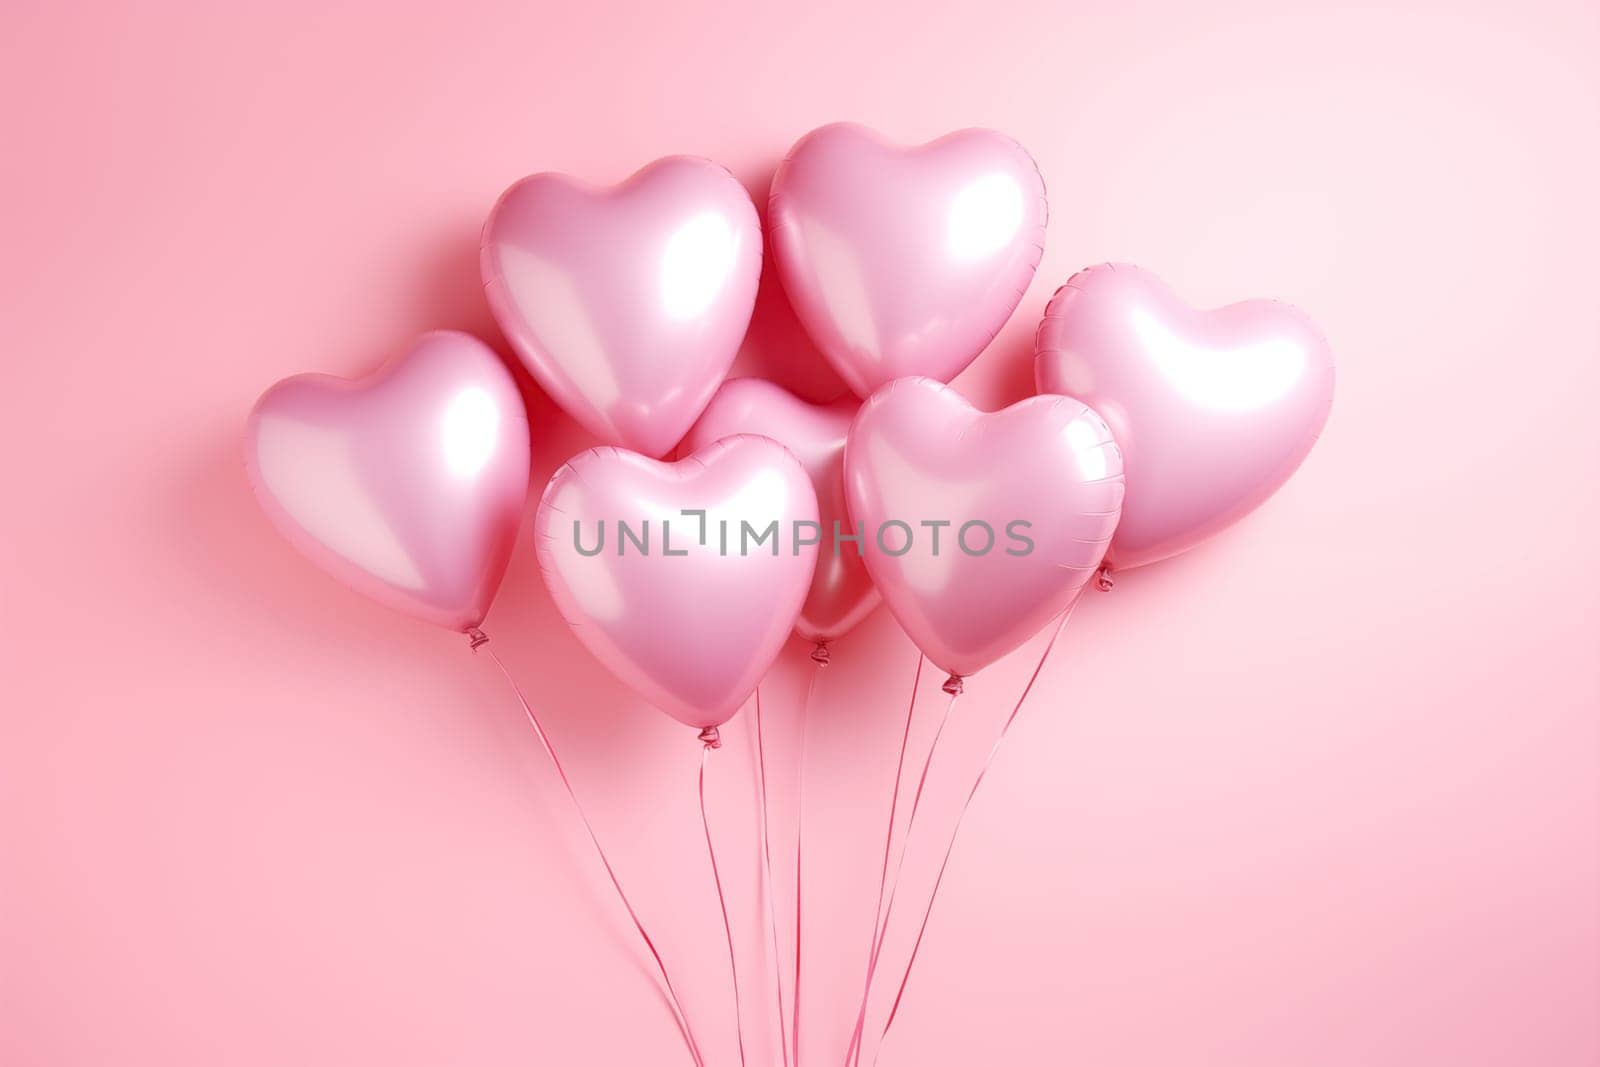 Pink Heart Balloons on a Soft Pink Background by dimol